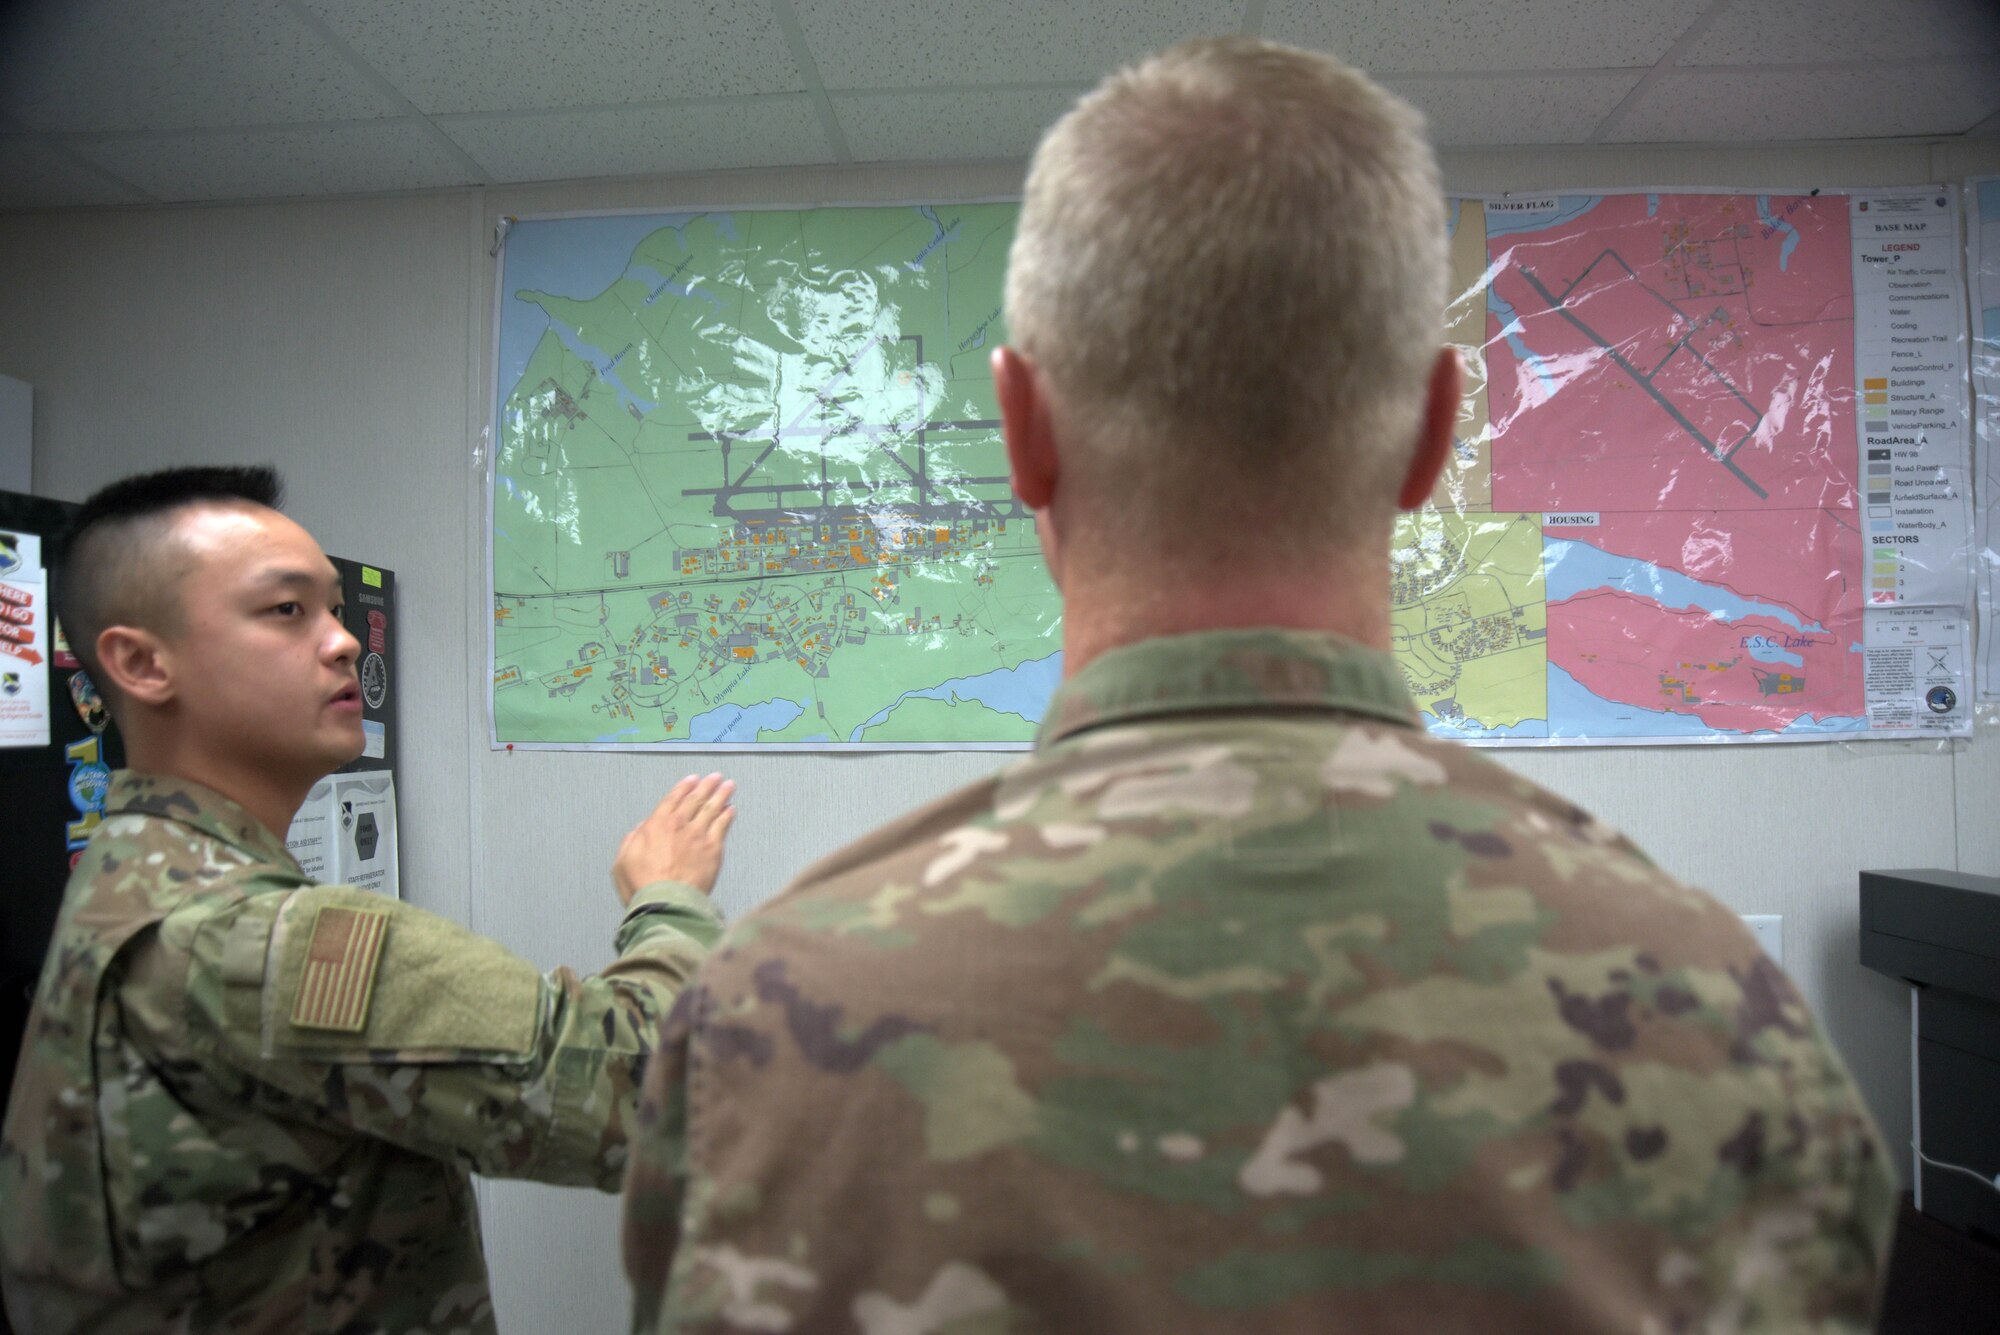 Airman 1st Class Brian Nguyen, 325th Operational Medical Readiness Squadron Ambulance Services Department medic, left, briefs Col. Brian Laidlaw, 325th Fighter Wing commander, right, on Oct. 4, 2019, at Tyndall Air Force Base, Florida. Several maps depict the designated area of responsibility the 325th OMRS ASD has both inside and outside of the installation’s borders. (U.S. Air Force photo by Staff Sgt. Magen M. Reeves)